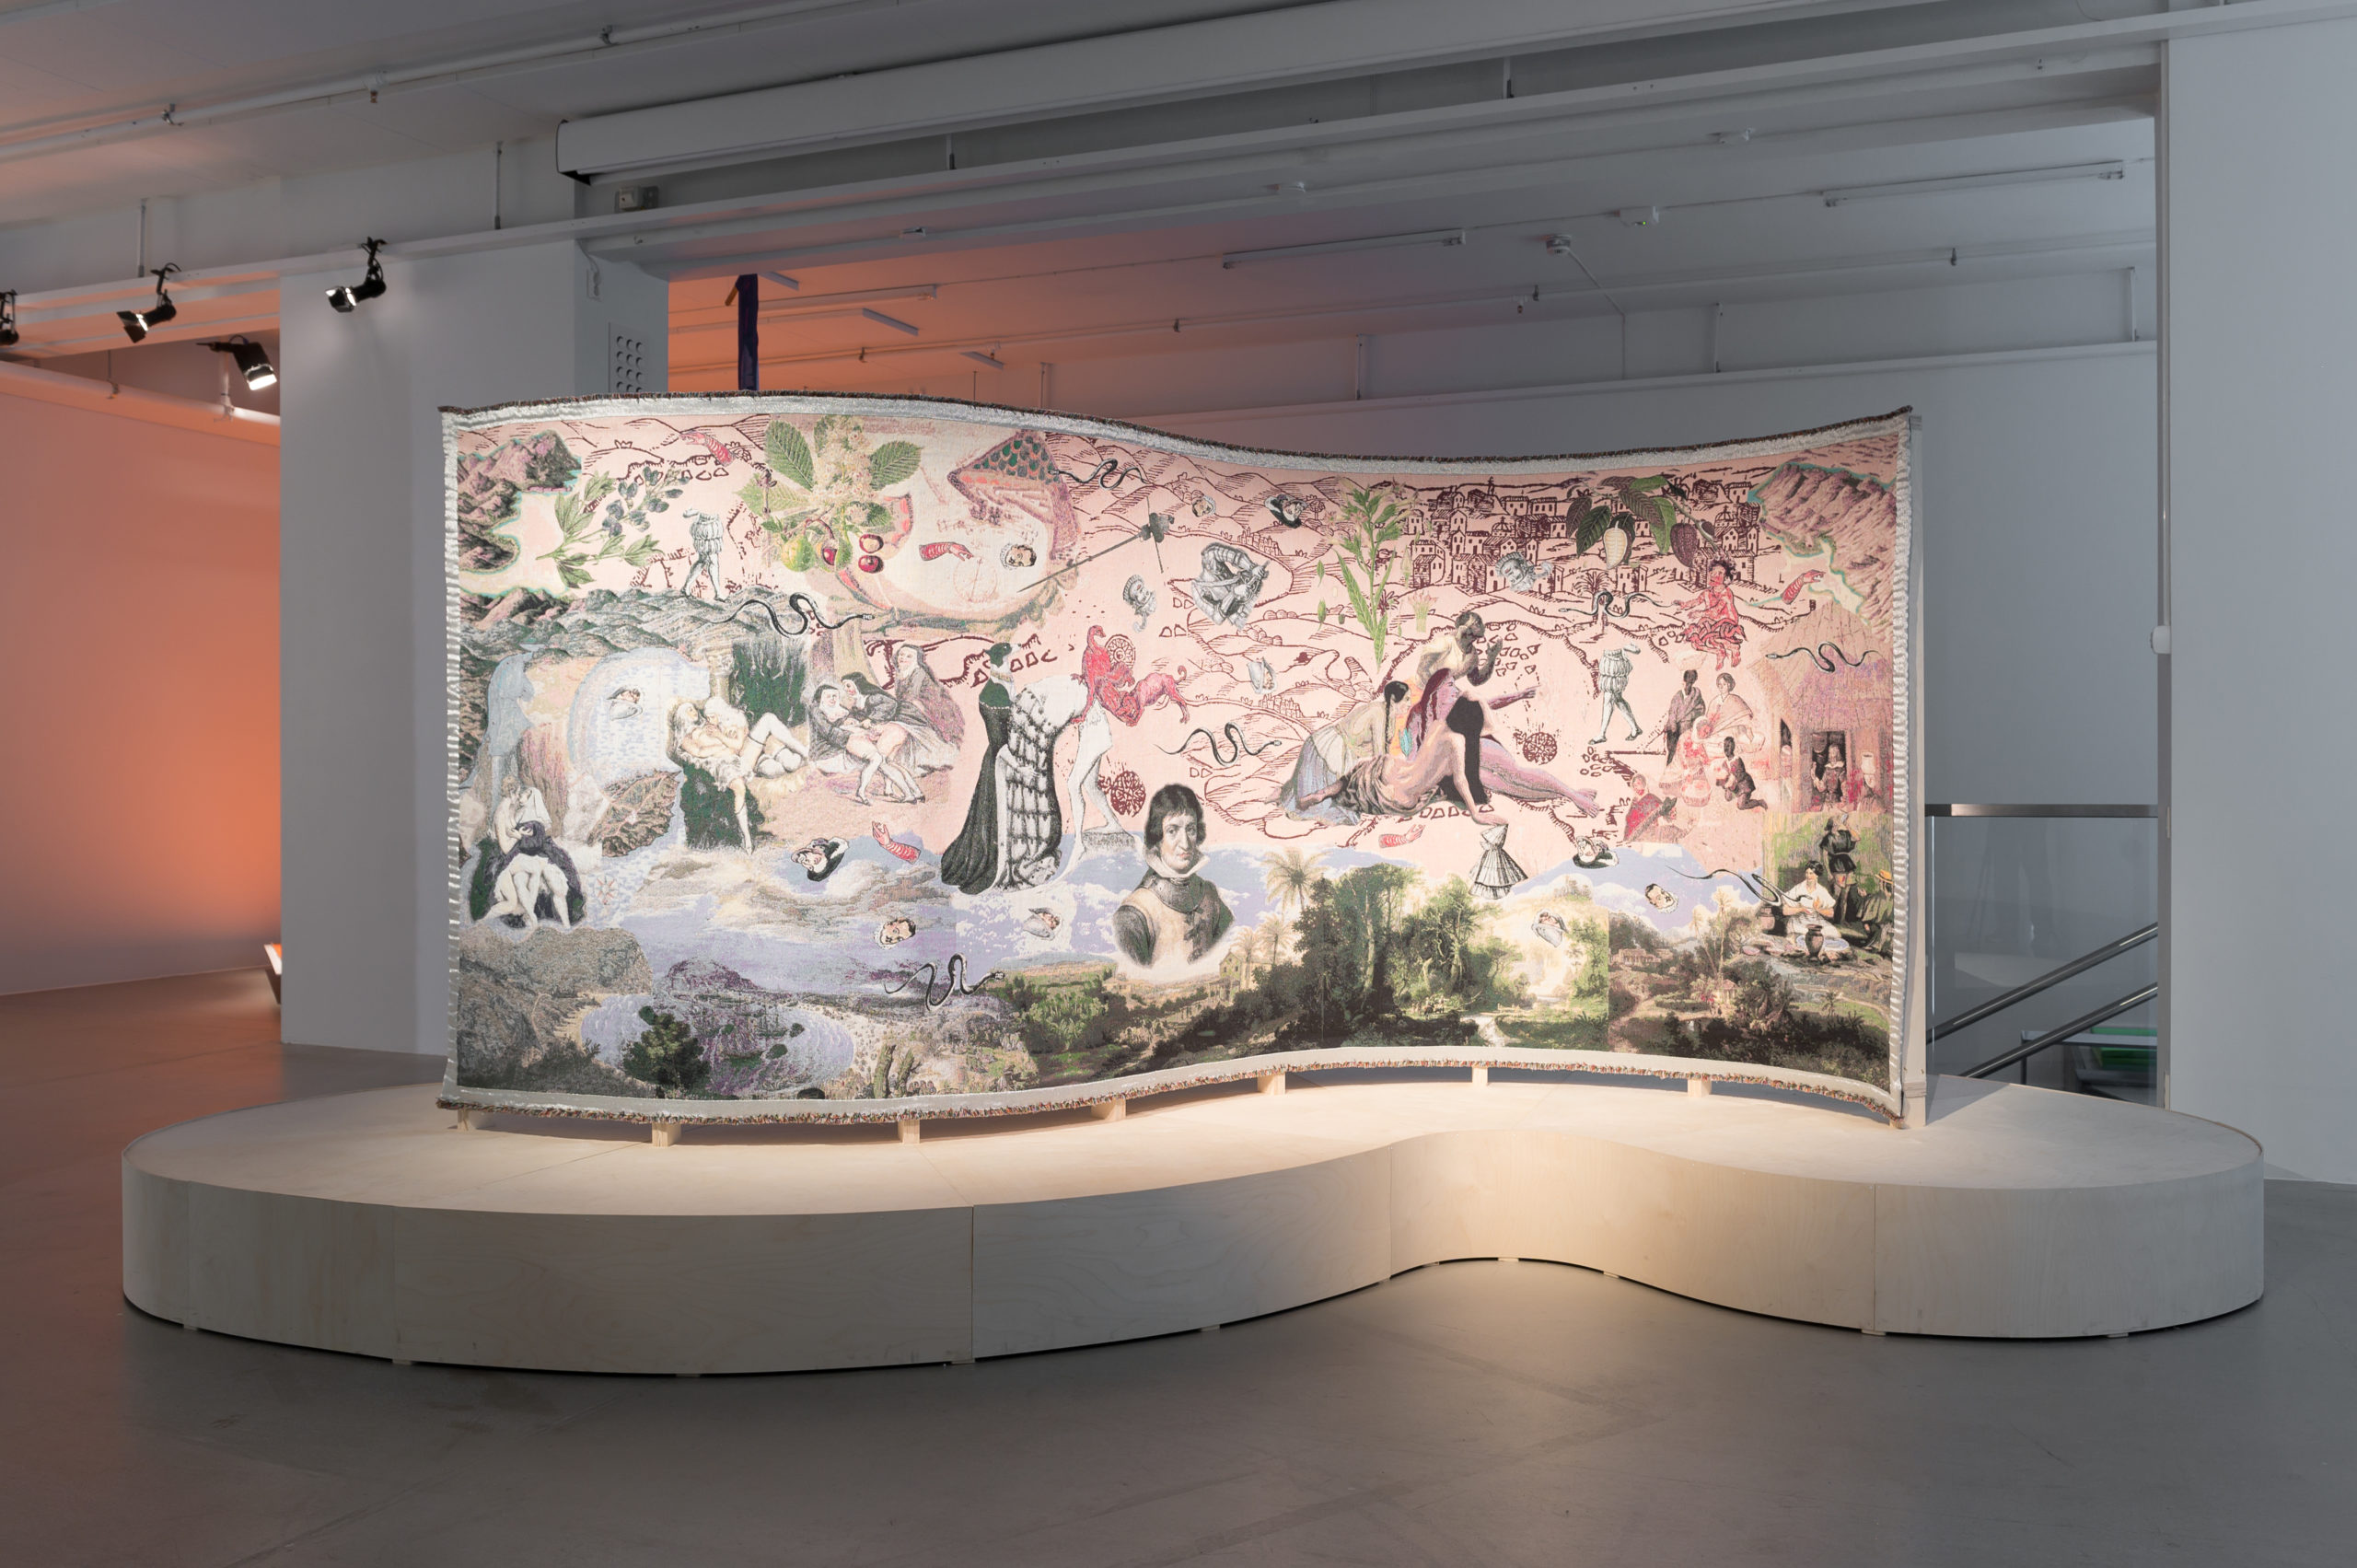 Mercedes Azpilicueta, The Lieutenant–Nun is Passing: An Autobiography of Katalina, Antonio, Alfonso and More (2021), jacquard tapestry (Merino wool, cotton, metallic yarn), 160 x 400 cm. Courtesy the artist. Commissioned and produced by Gasworks. Photo: Daniel Vincent Hansen. In the exhibition Unweaving the binary code at Kunsthall Trondheim as part of the 3rd Hannah Ryggen Triennale, 2022.